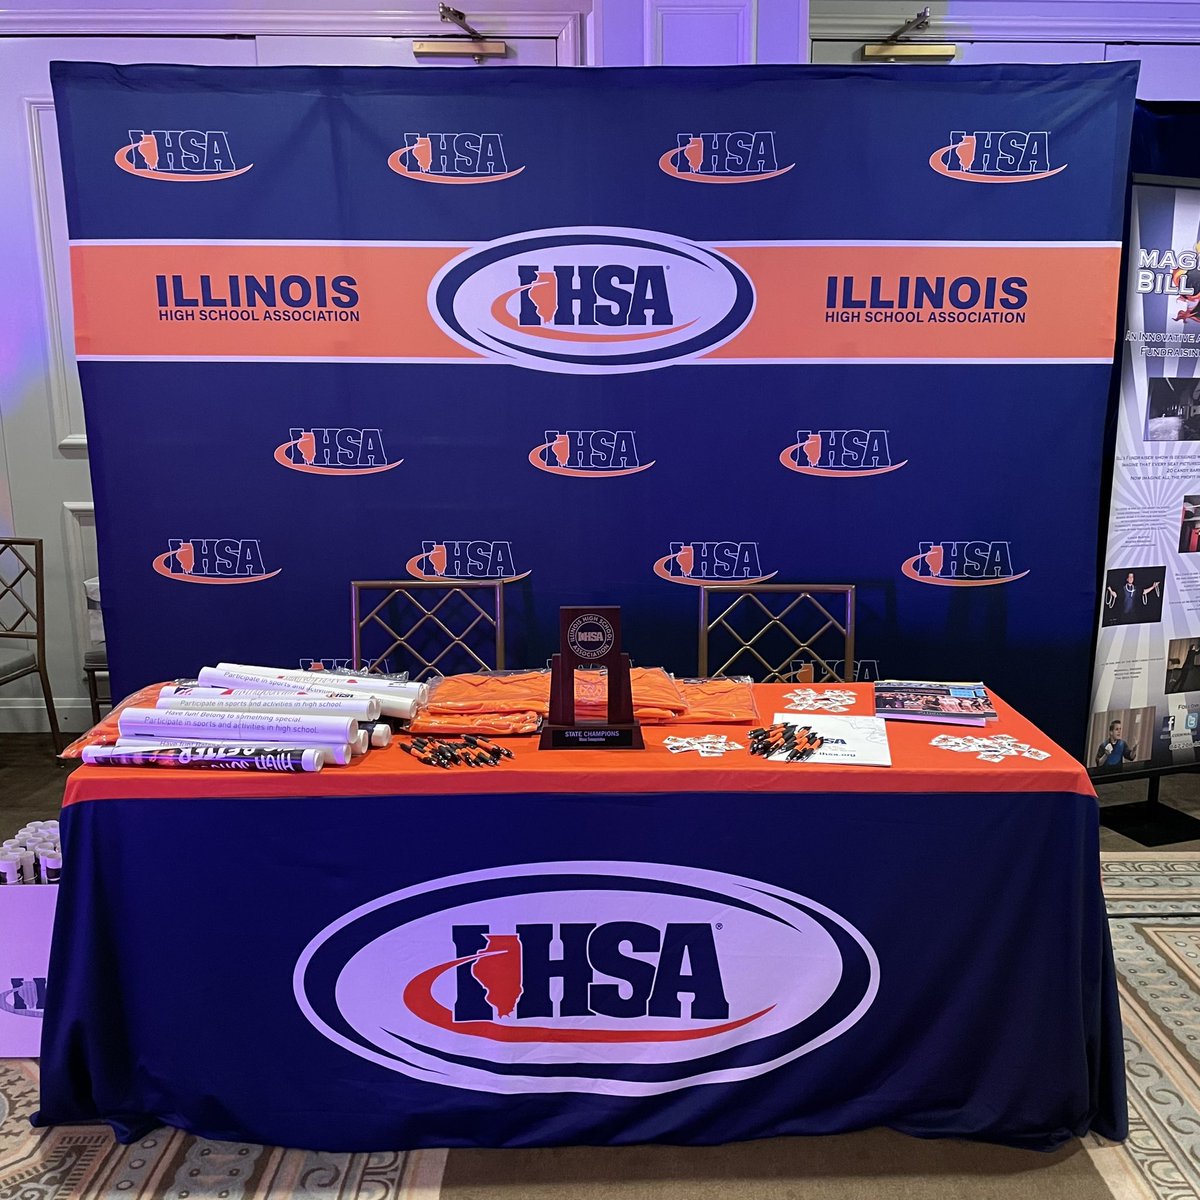 Thanks to @IDSA_activities for hosting another great conference and providing the opportunity for @IHSA_IL to network with the state’s Activity Directors and activity sponsors.